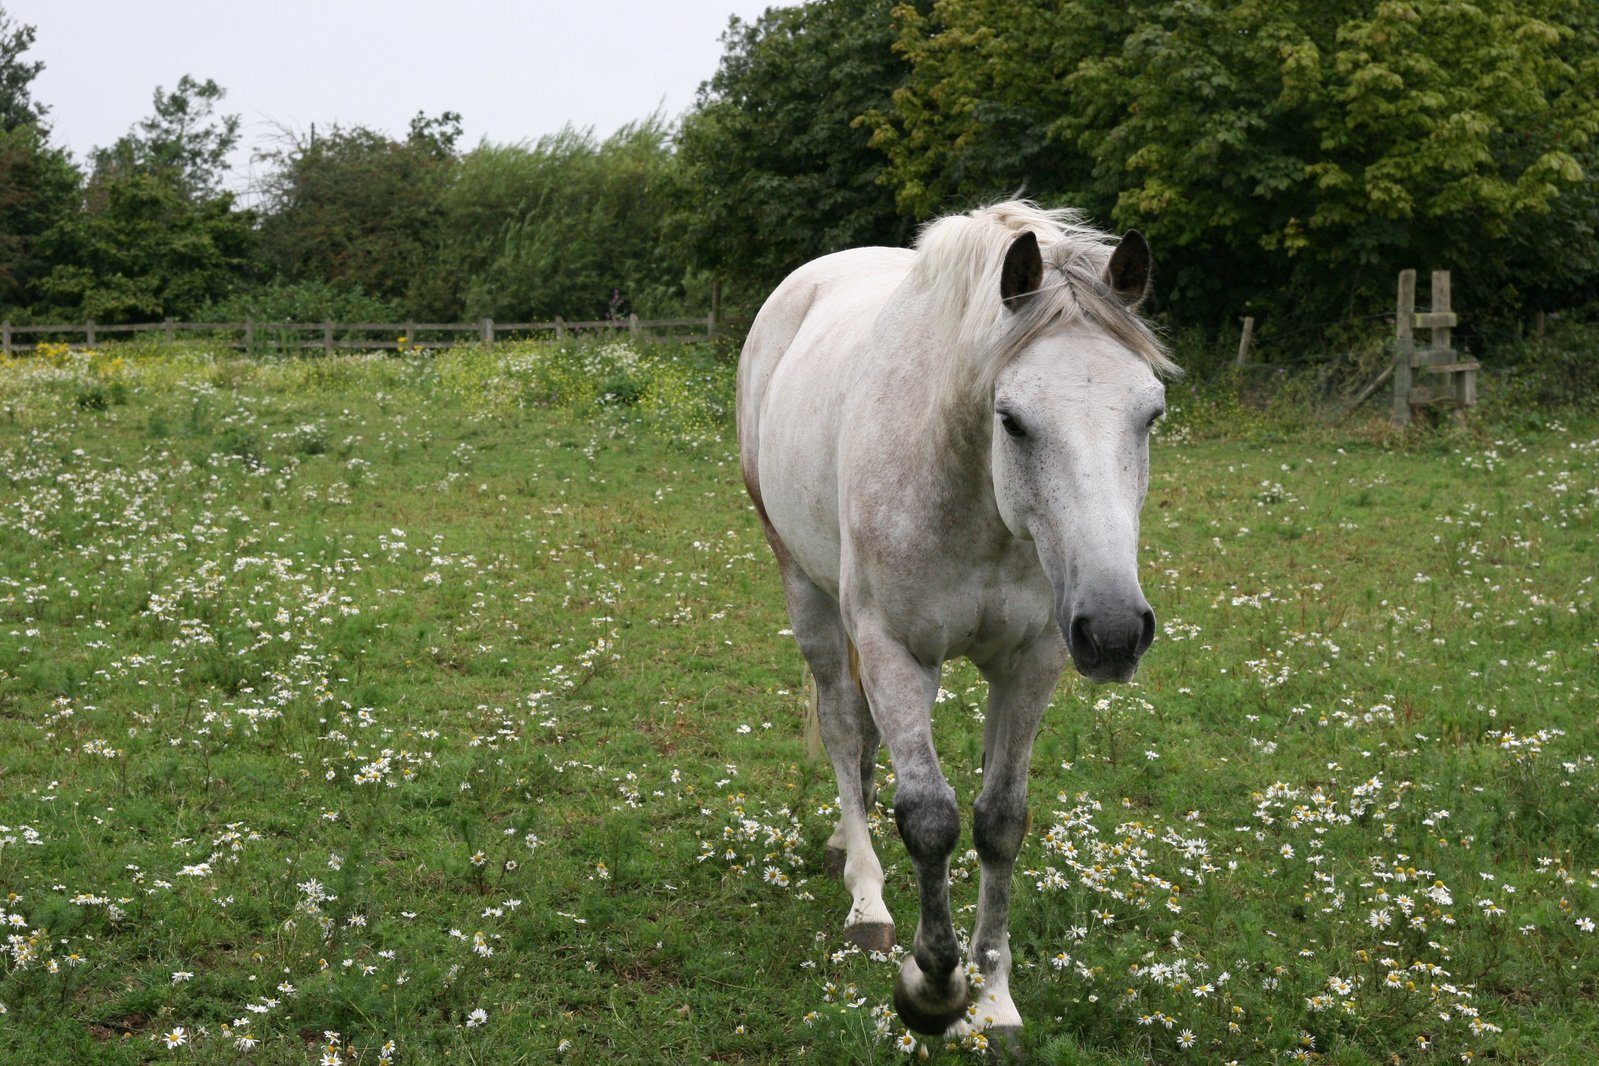 a white horse standing in a grassy field